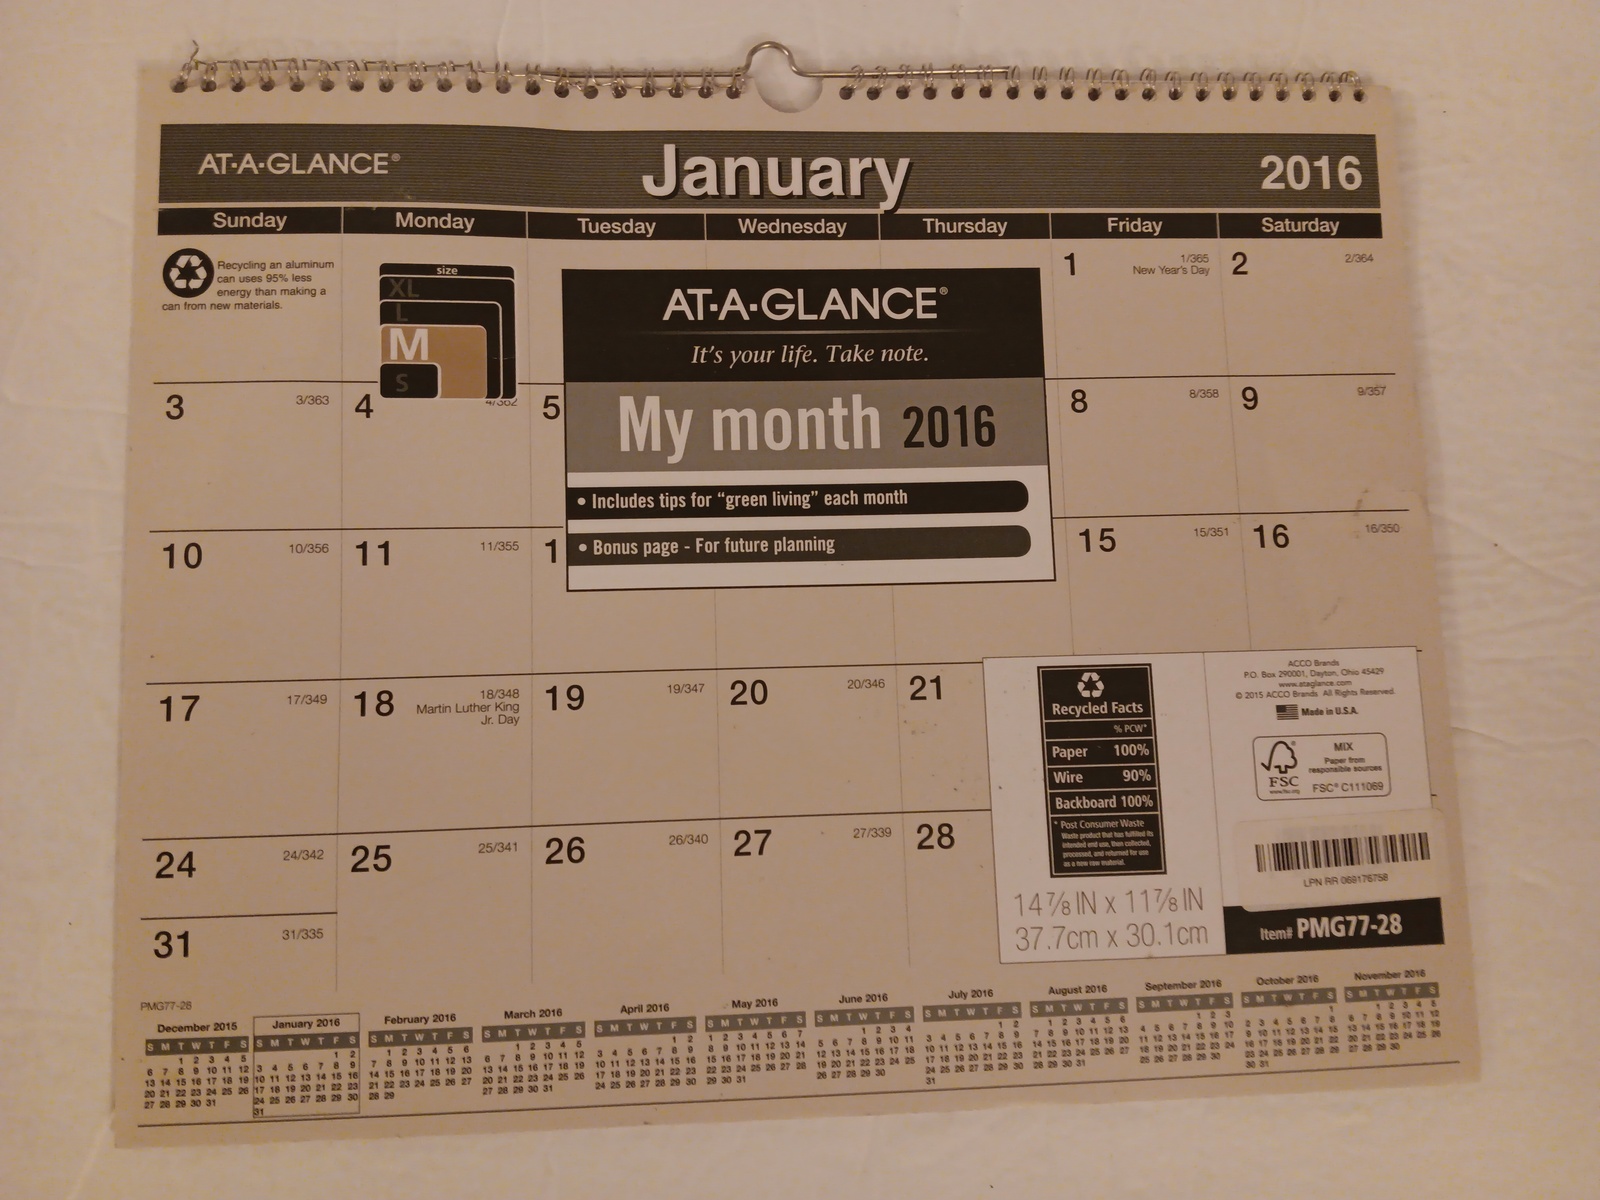 At-A-Glance Monthly Wall Calendar 2016, Recycled, 14-7/8 x 11-7/8 Inches  - $19.99